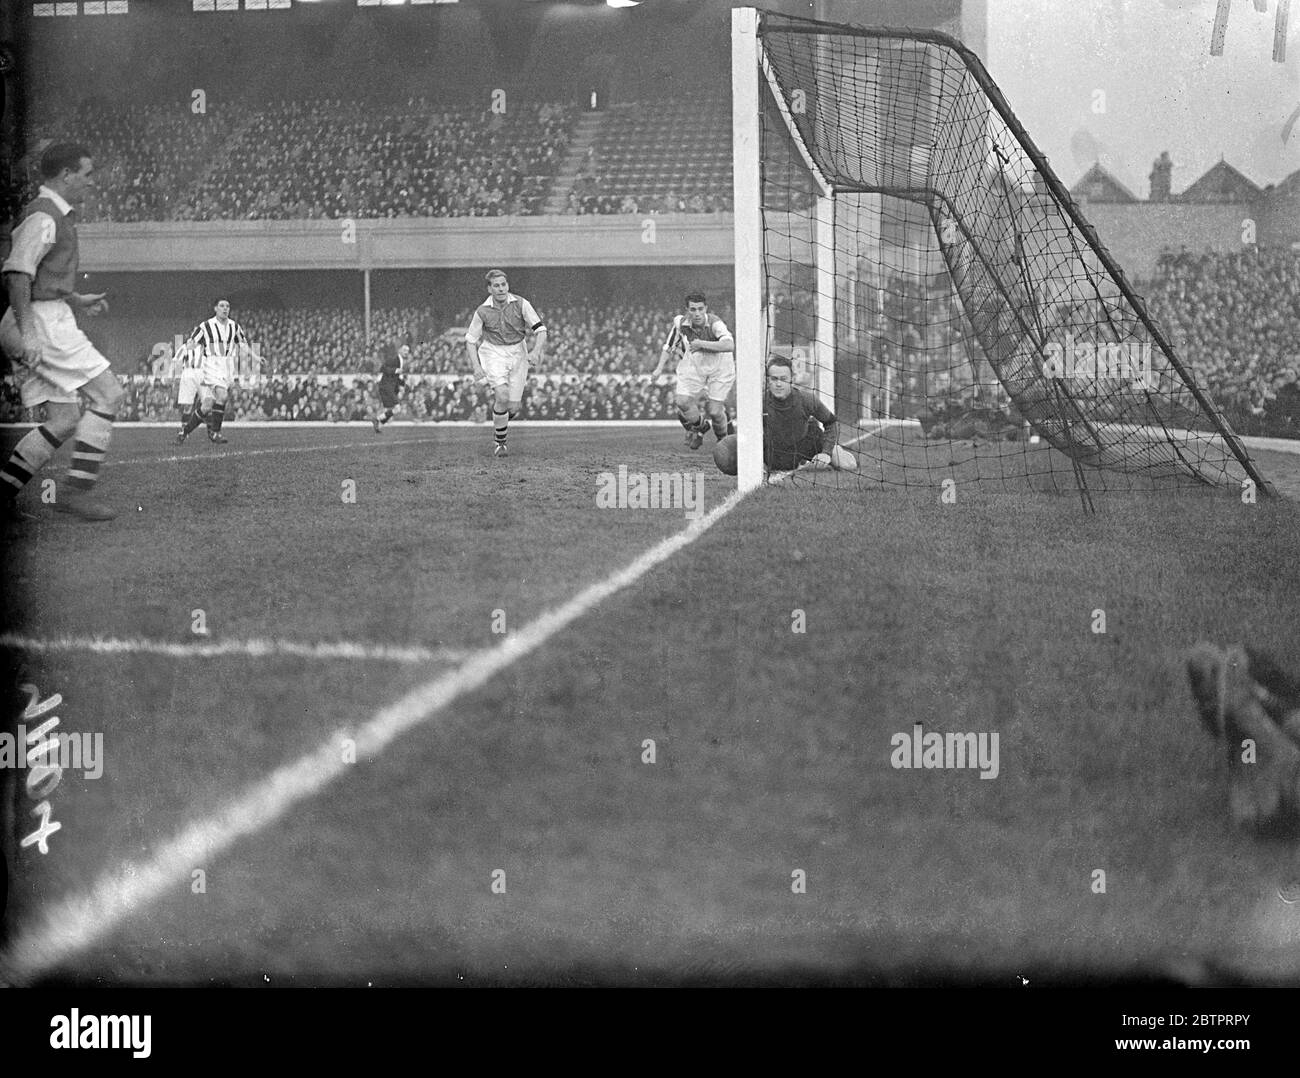 Worrying moment for Arsenal's goalkeeper. Arsenal and West Bromwich Albion met in a first division match at Highbury. Alex Wilson, the Arsenal goalkeeper, watching apprehensively as the ball nearly trickles into the net from a melee in front of goal. 13 November 1937 Stock Photo